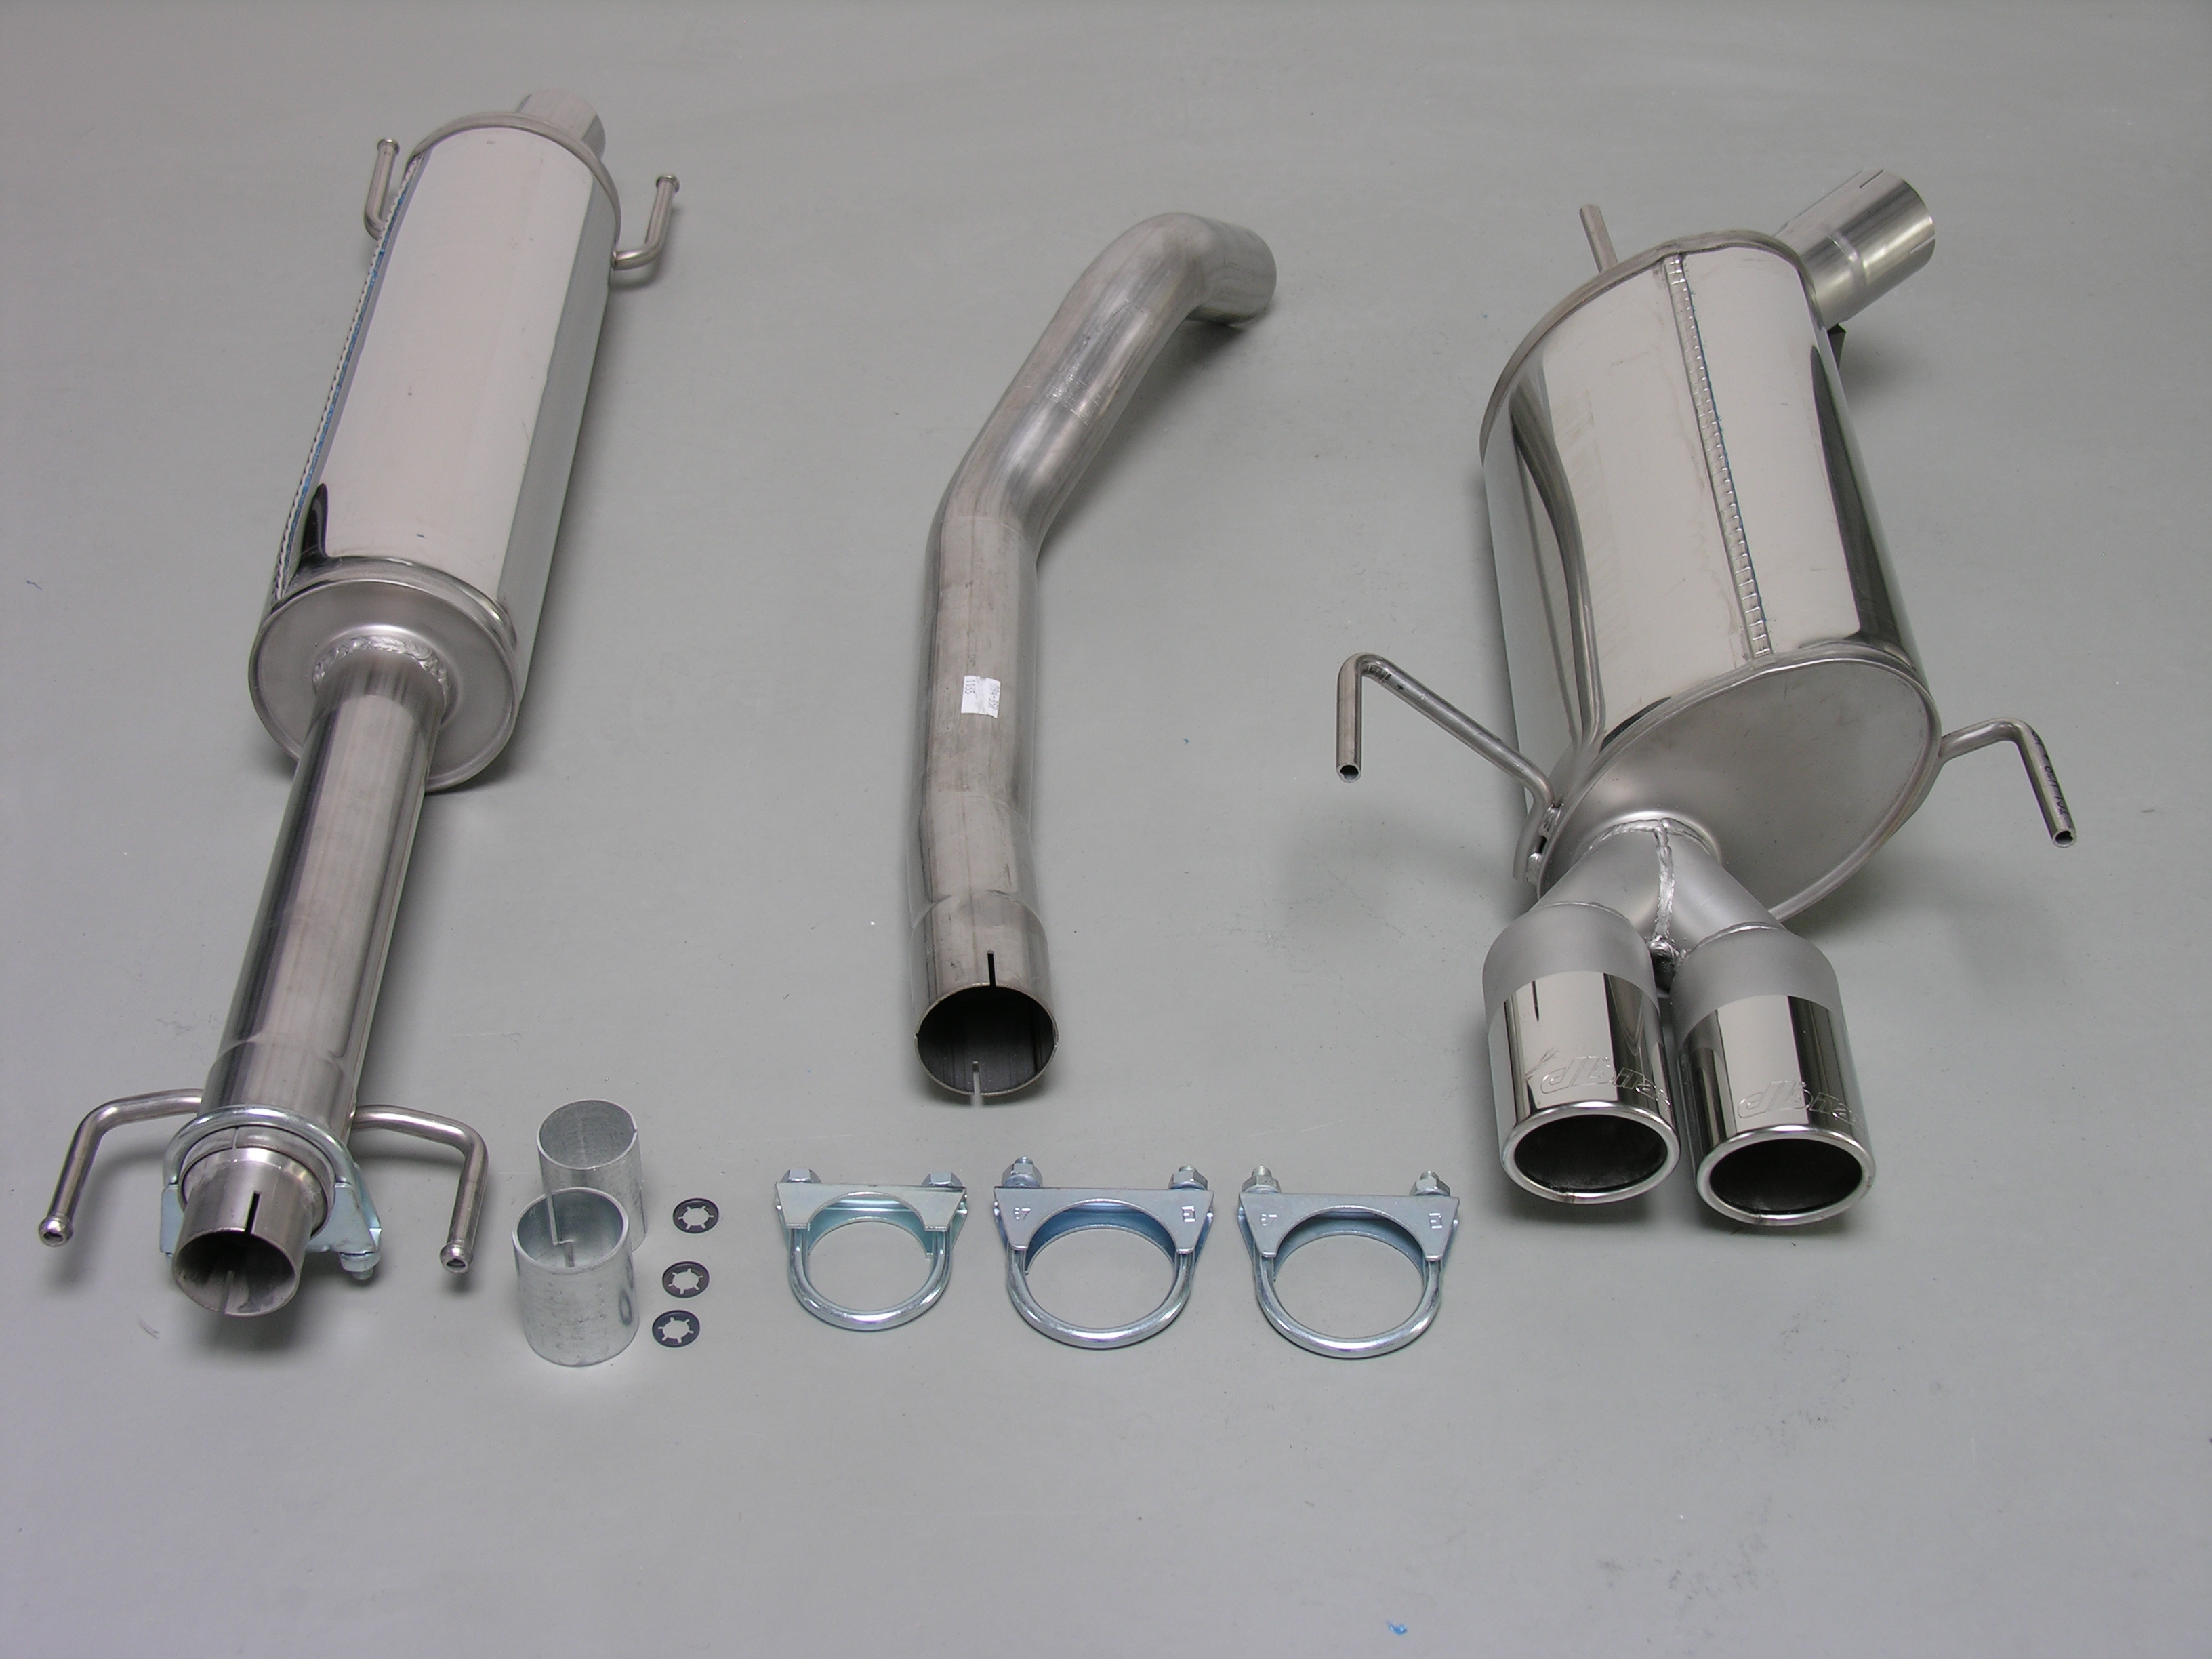 Stainless Steel - Exhaust systems for Opel / Vauxhall  Corsa C & Tigra B  Tailpipe design  2x80mm